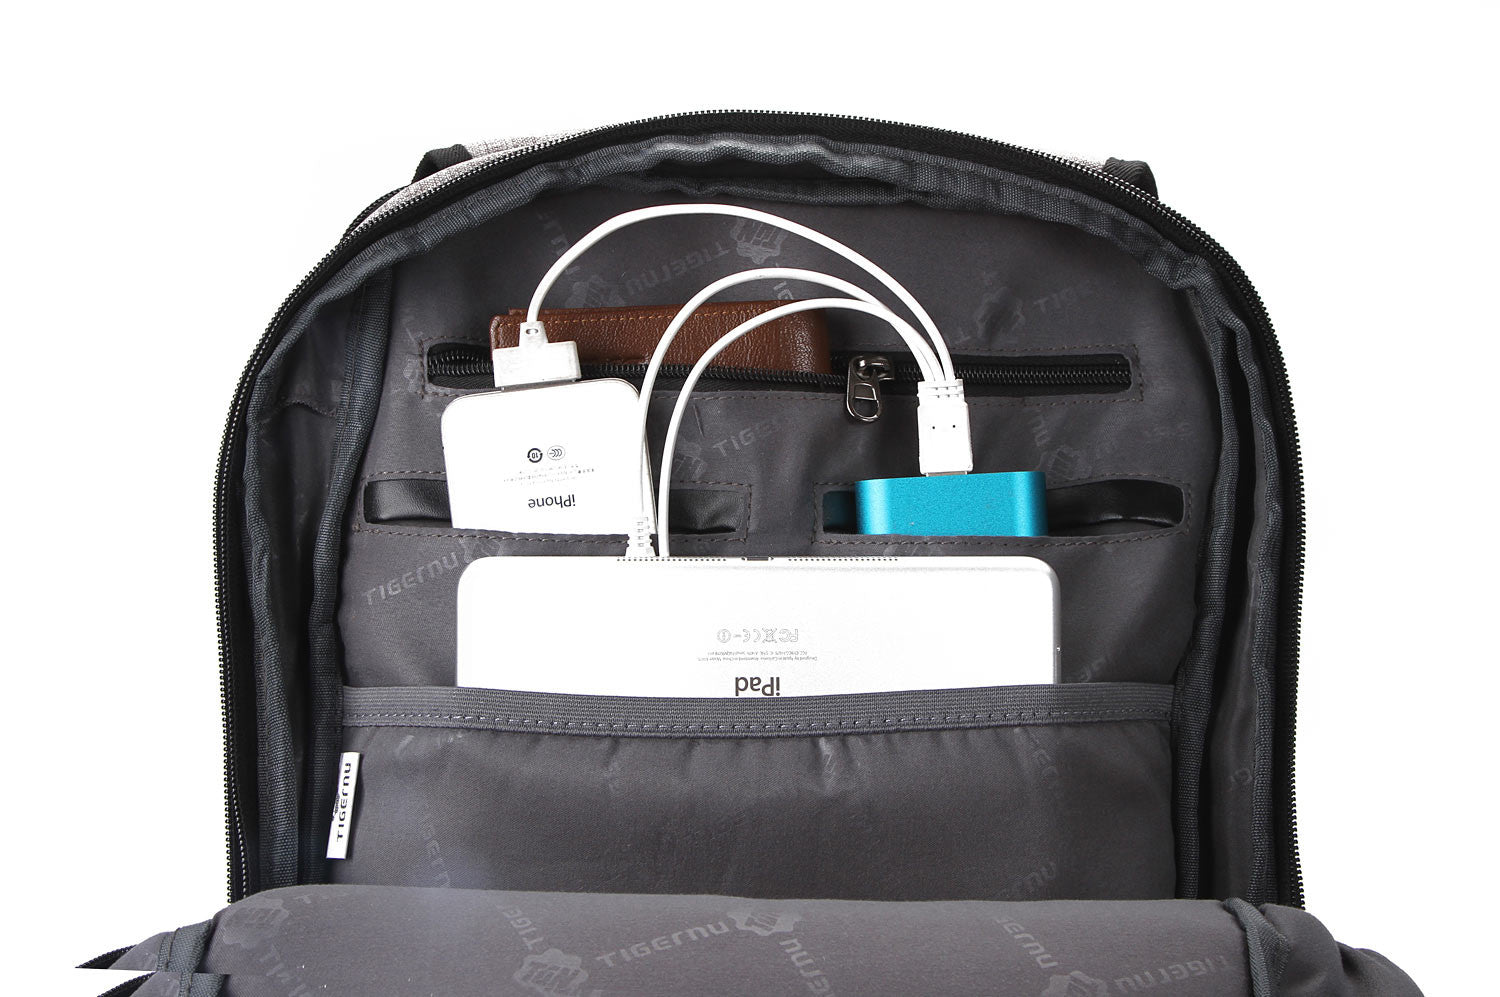 Powerbank backpack charge devices